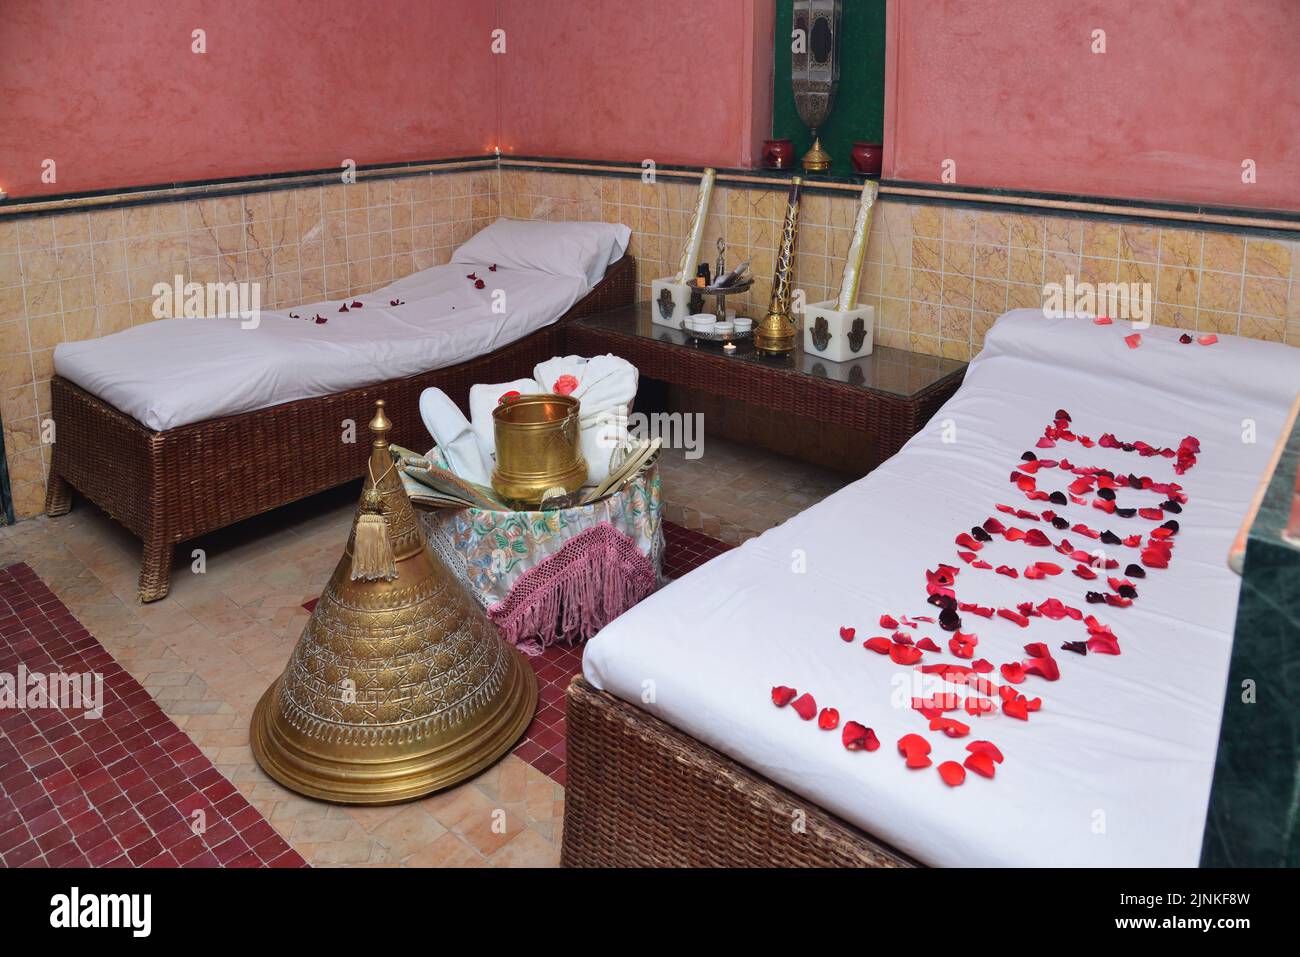 Moroccan bath and spa with roses above the bed Stock Photo